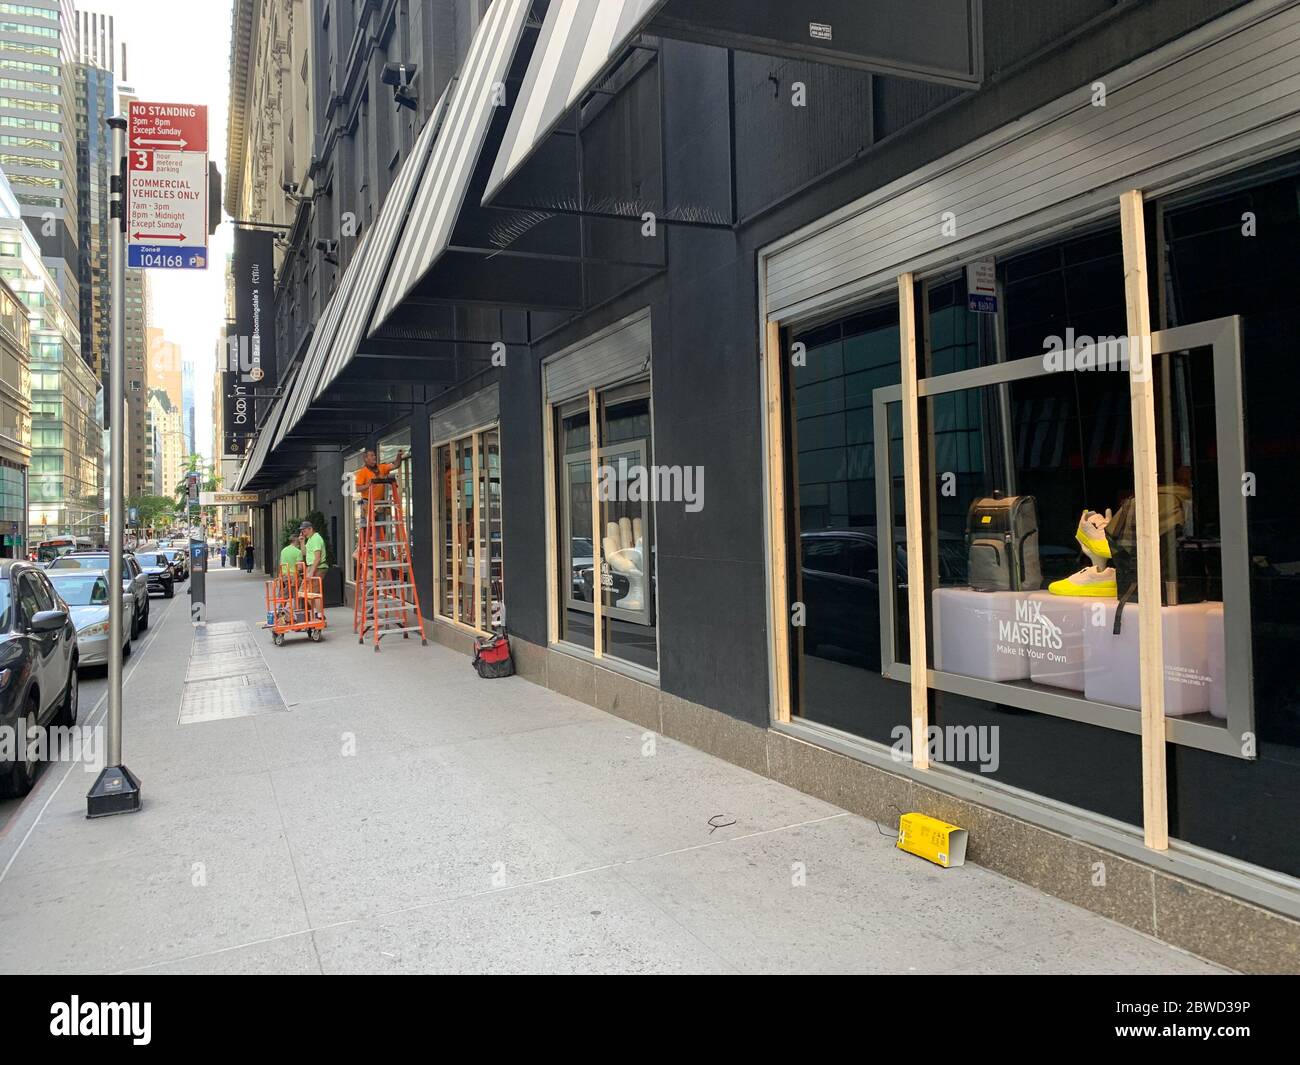 New York, New York, USA. 31st May, 2020. (NEW) Stores are covering up with woods against protests . May 31, 2020, New York, USA: As the protests in favor of George Floyd continue in new York with their riots, destructions and looting some stores are now covering up with woods to prevent protesters from entering.Credit: Niyi Fote /Thenews2. Credit: Niyi Fote/TheNEWS2/ZUMA Wire/Alamy Live News Stock Photo